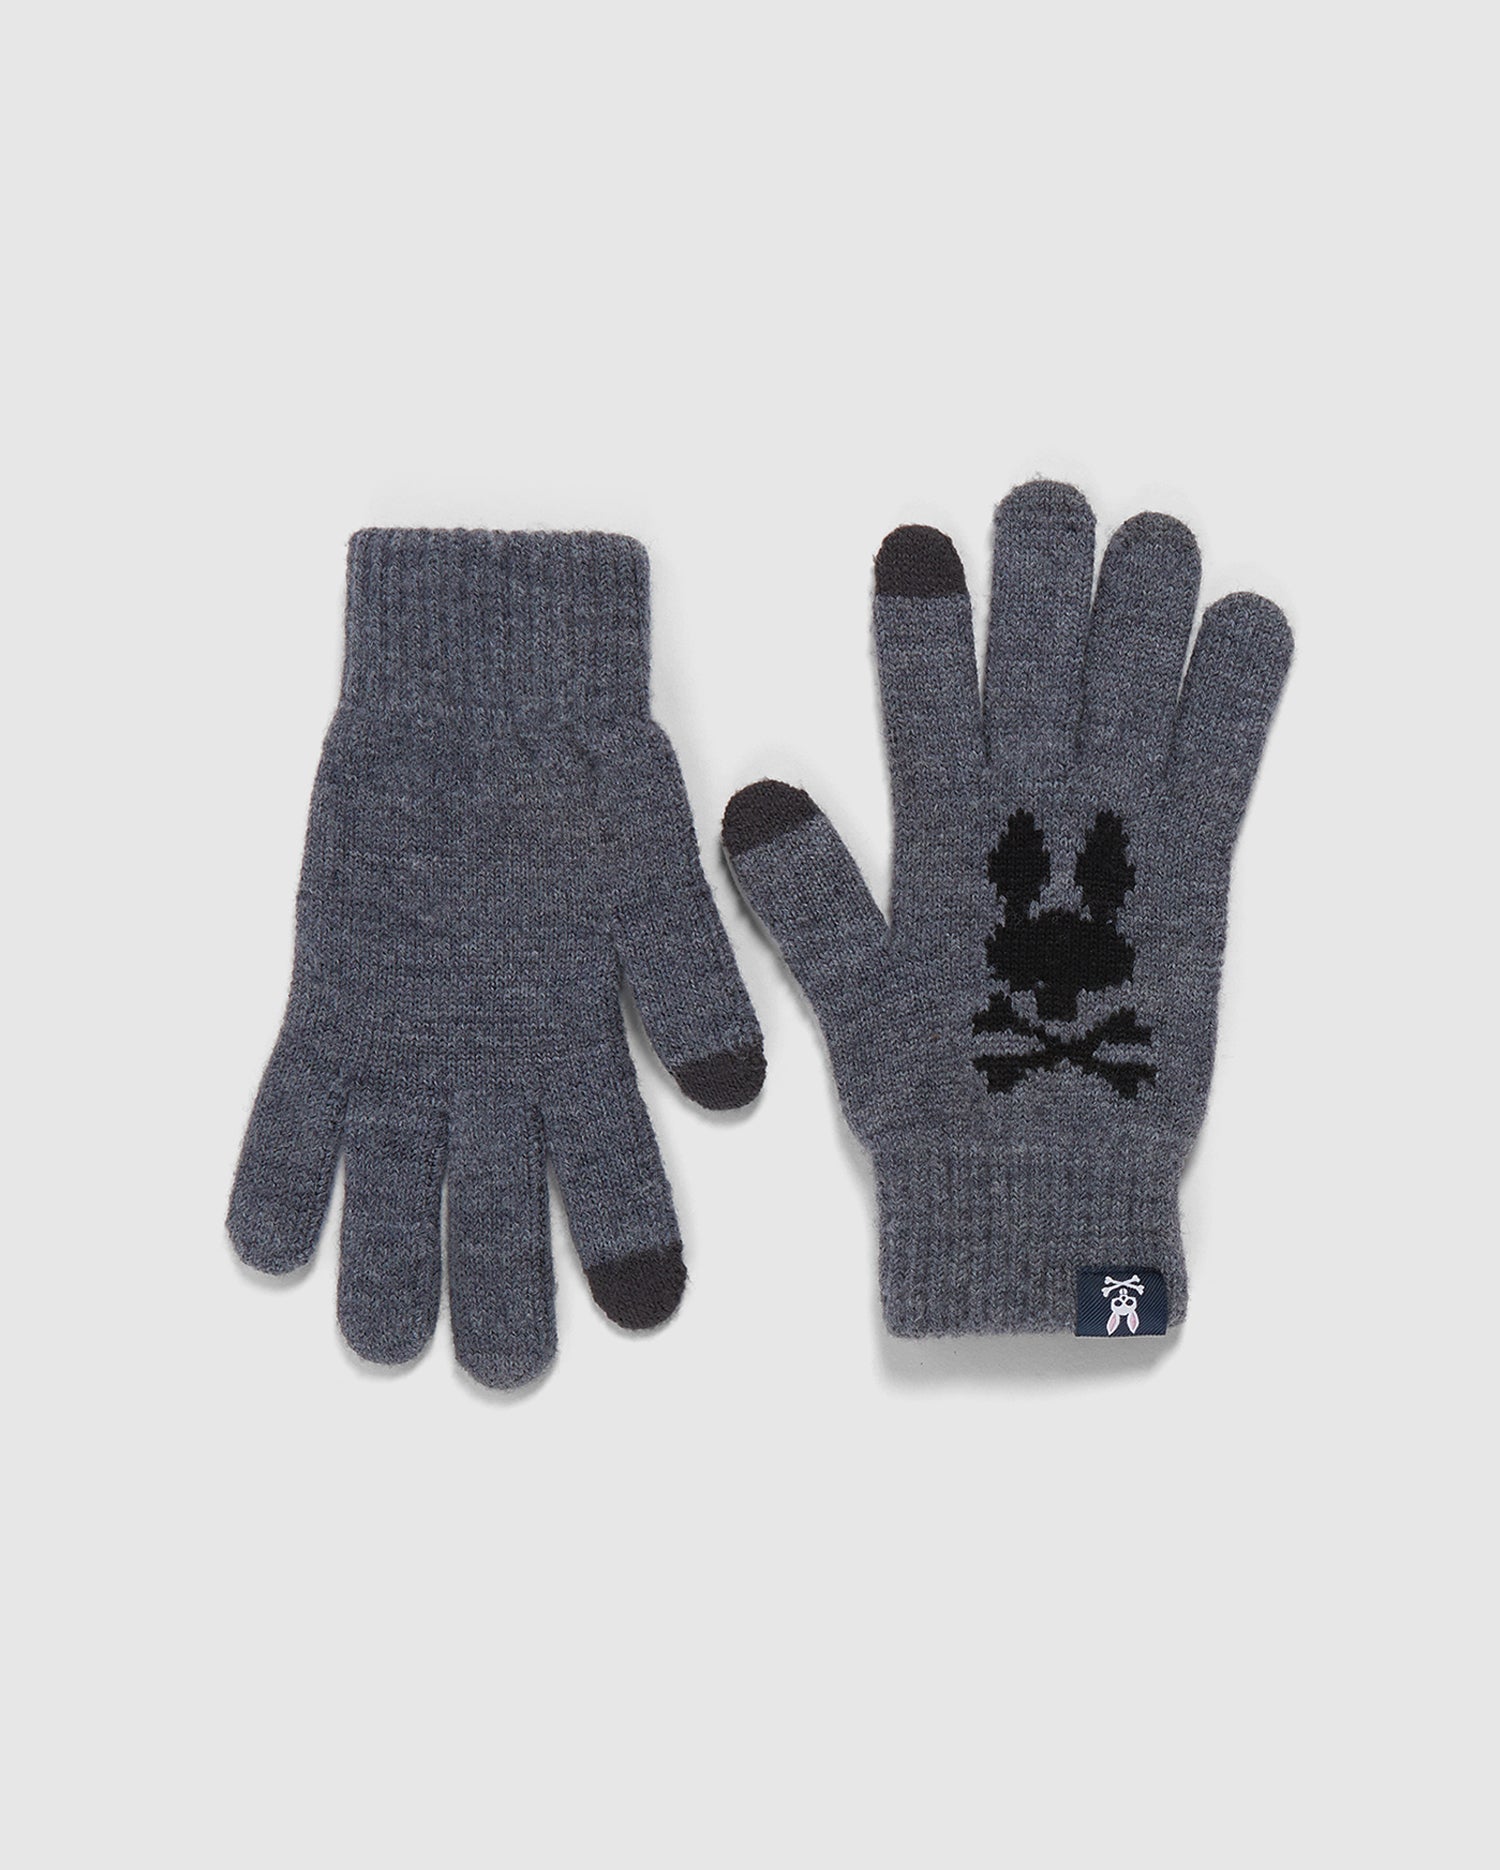 MENS WOOL GLOVES WITH GREY FINGER TOUCH- B6A998U1GL